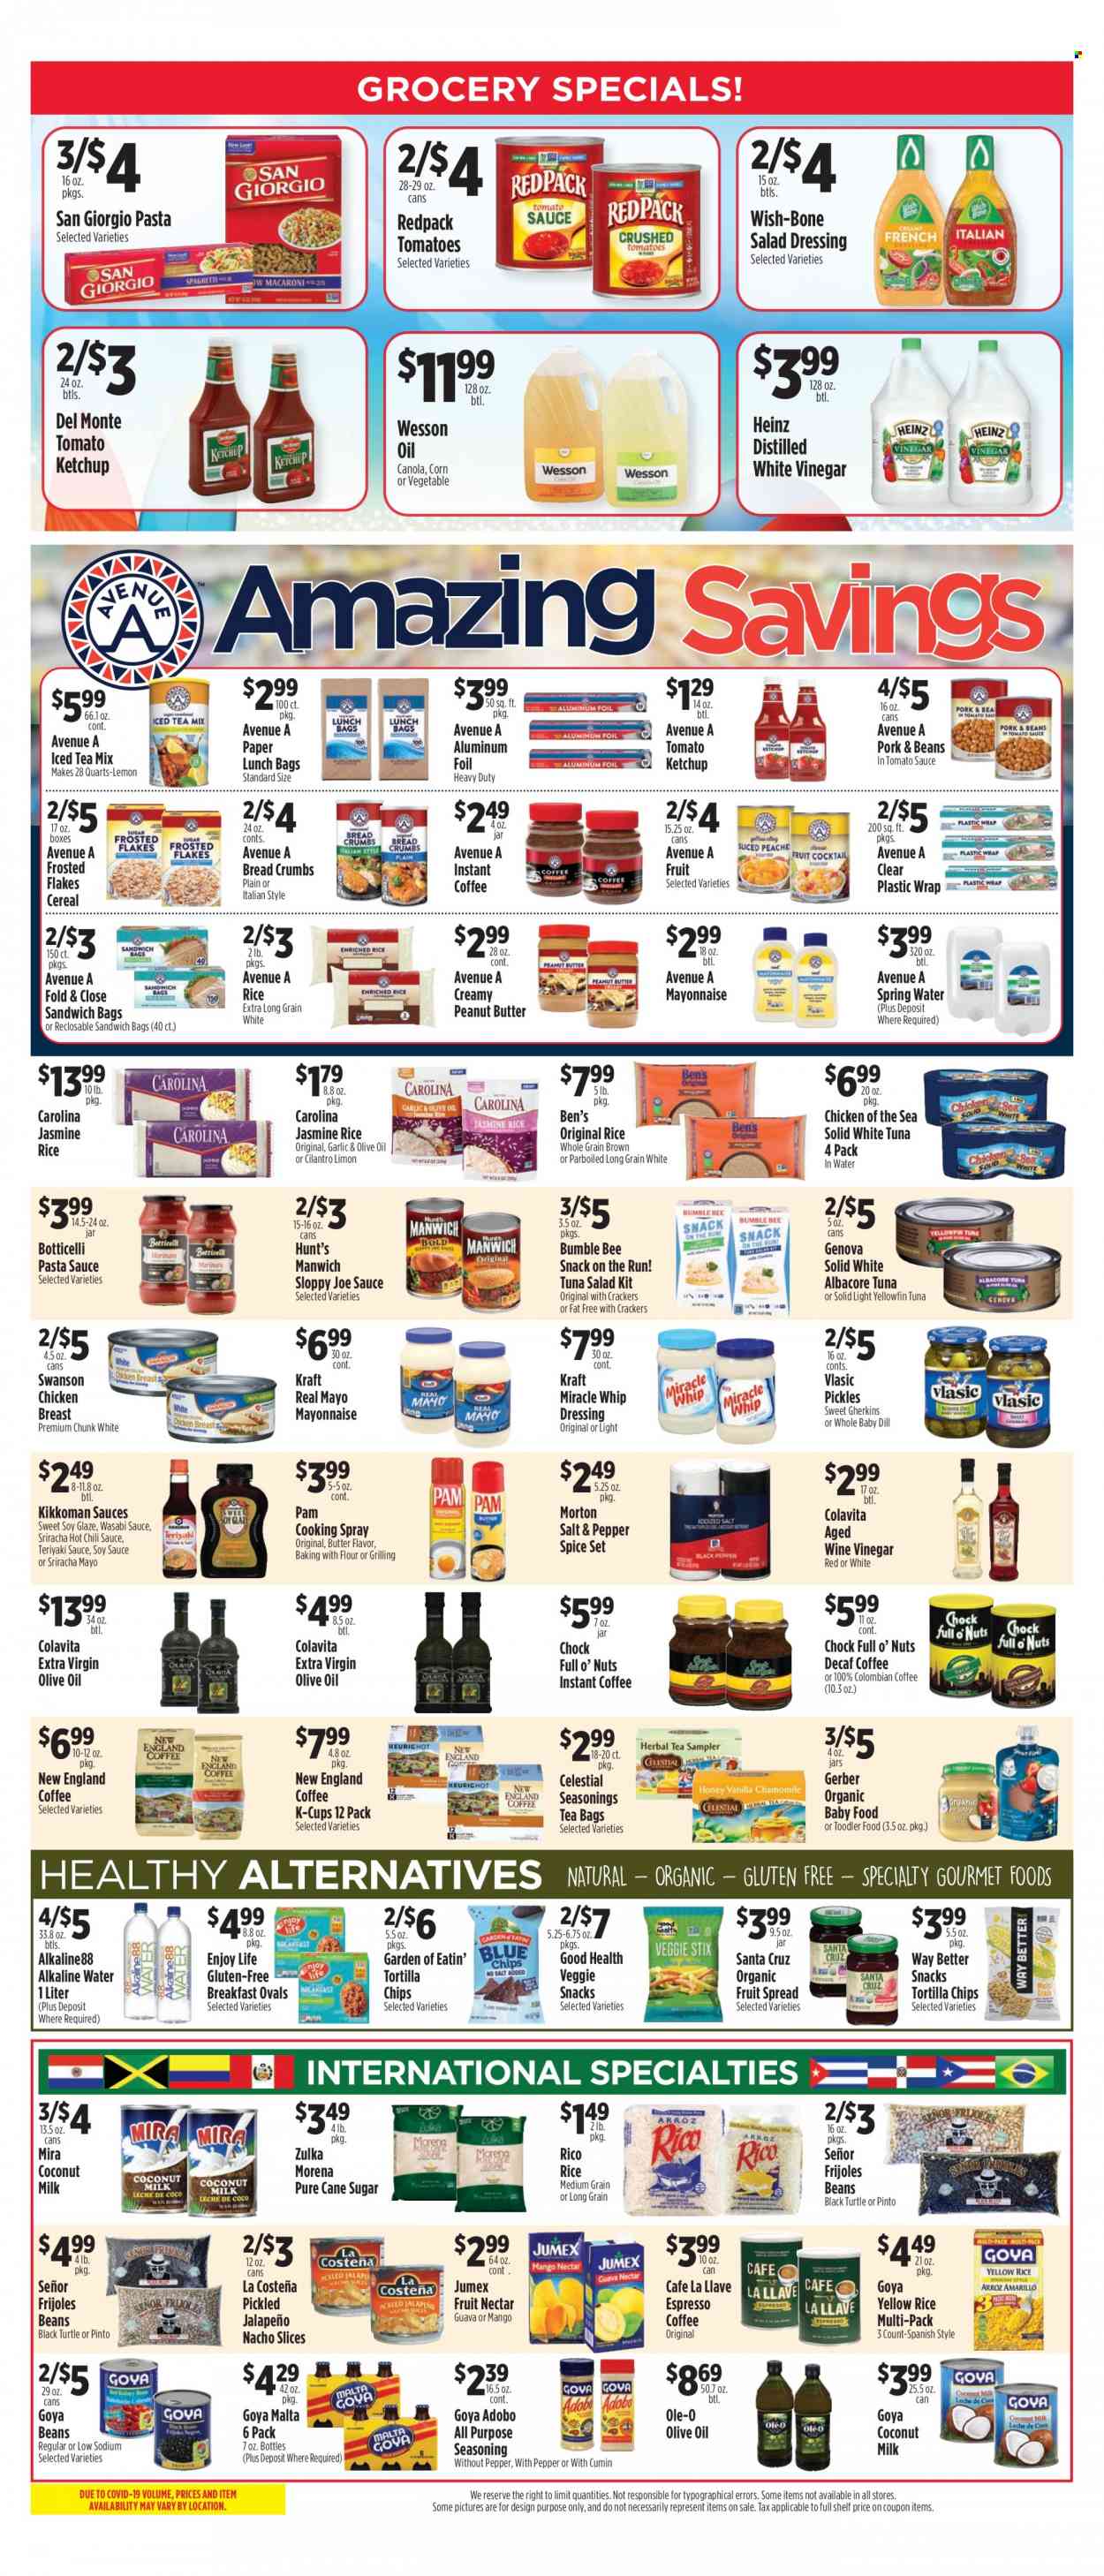 thumbnail - Pioneer Supermarkets Flyer - 08/14/2022 - 08/20/2022 - Sales products - breadcrumbs, corn, tomatoes, jalapeño, tuna, pasta sauce, Bumble Bee, Kraft®, tuna salad, Miracle Whip, snack, crackers, Gerber, tortilla chips, chips, cane sugar, sugar, coconut milk, Heinz, pickles, Chicken of the Sea, Goya, Manwich, Del Monte, cereals, Frosted Flakes, jasmine rice, cilantro, dill, wasabi, spice, cumin, adobo sauce, salad dressing, soy sauce, sriracha, ketchup, chilli sauce, Kikkoman, dressing, teriyaki sauce, cooking spray, extra virgin olive oil, wine vinegar, olive oil, peanut butter, fruit nectar, spring water, alkaline water, tea bags, instant coffee, coffee capsules, K-Cups, organic baby food, chicken breasts. Page 2.